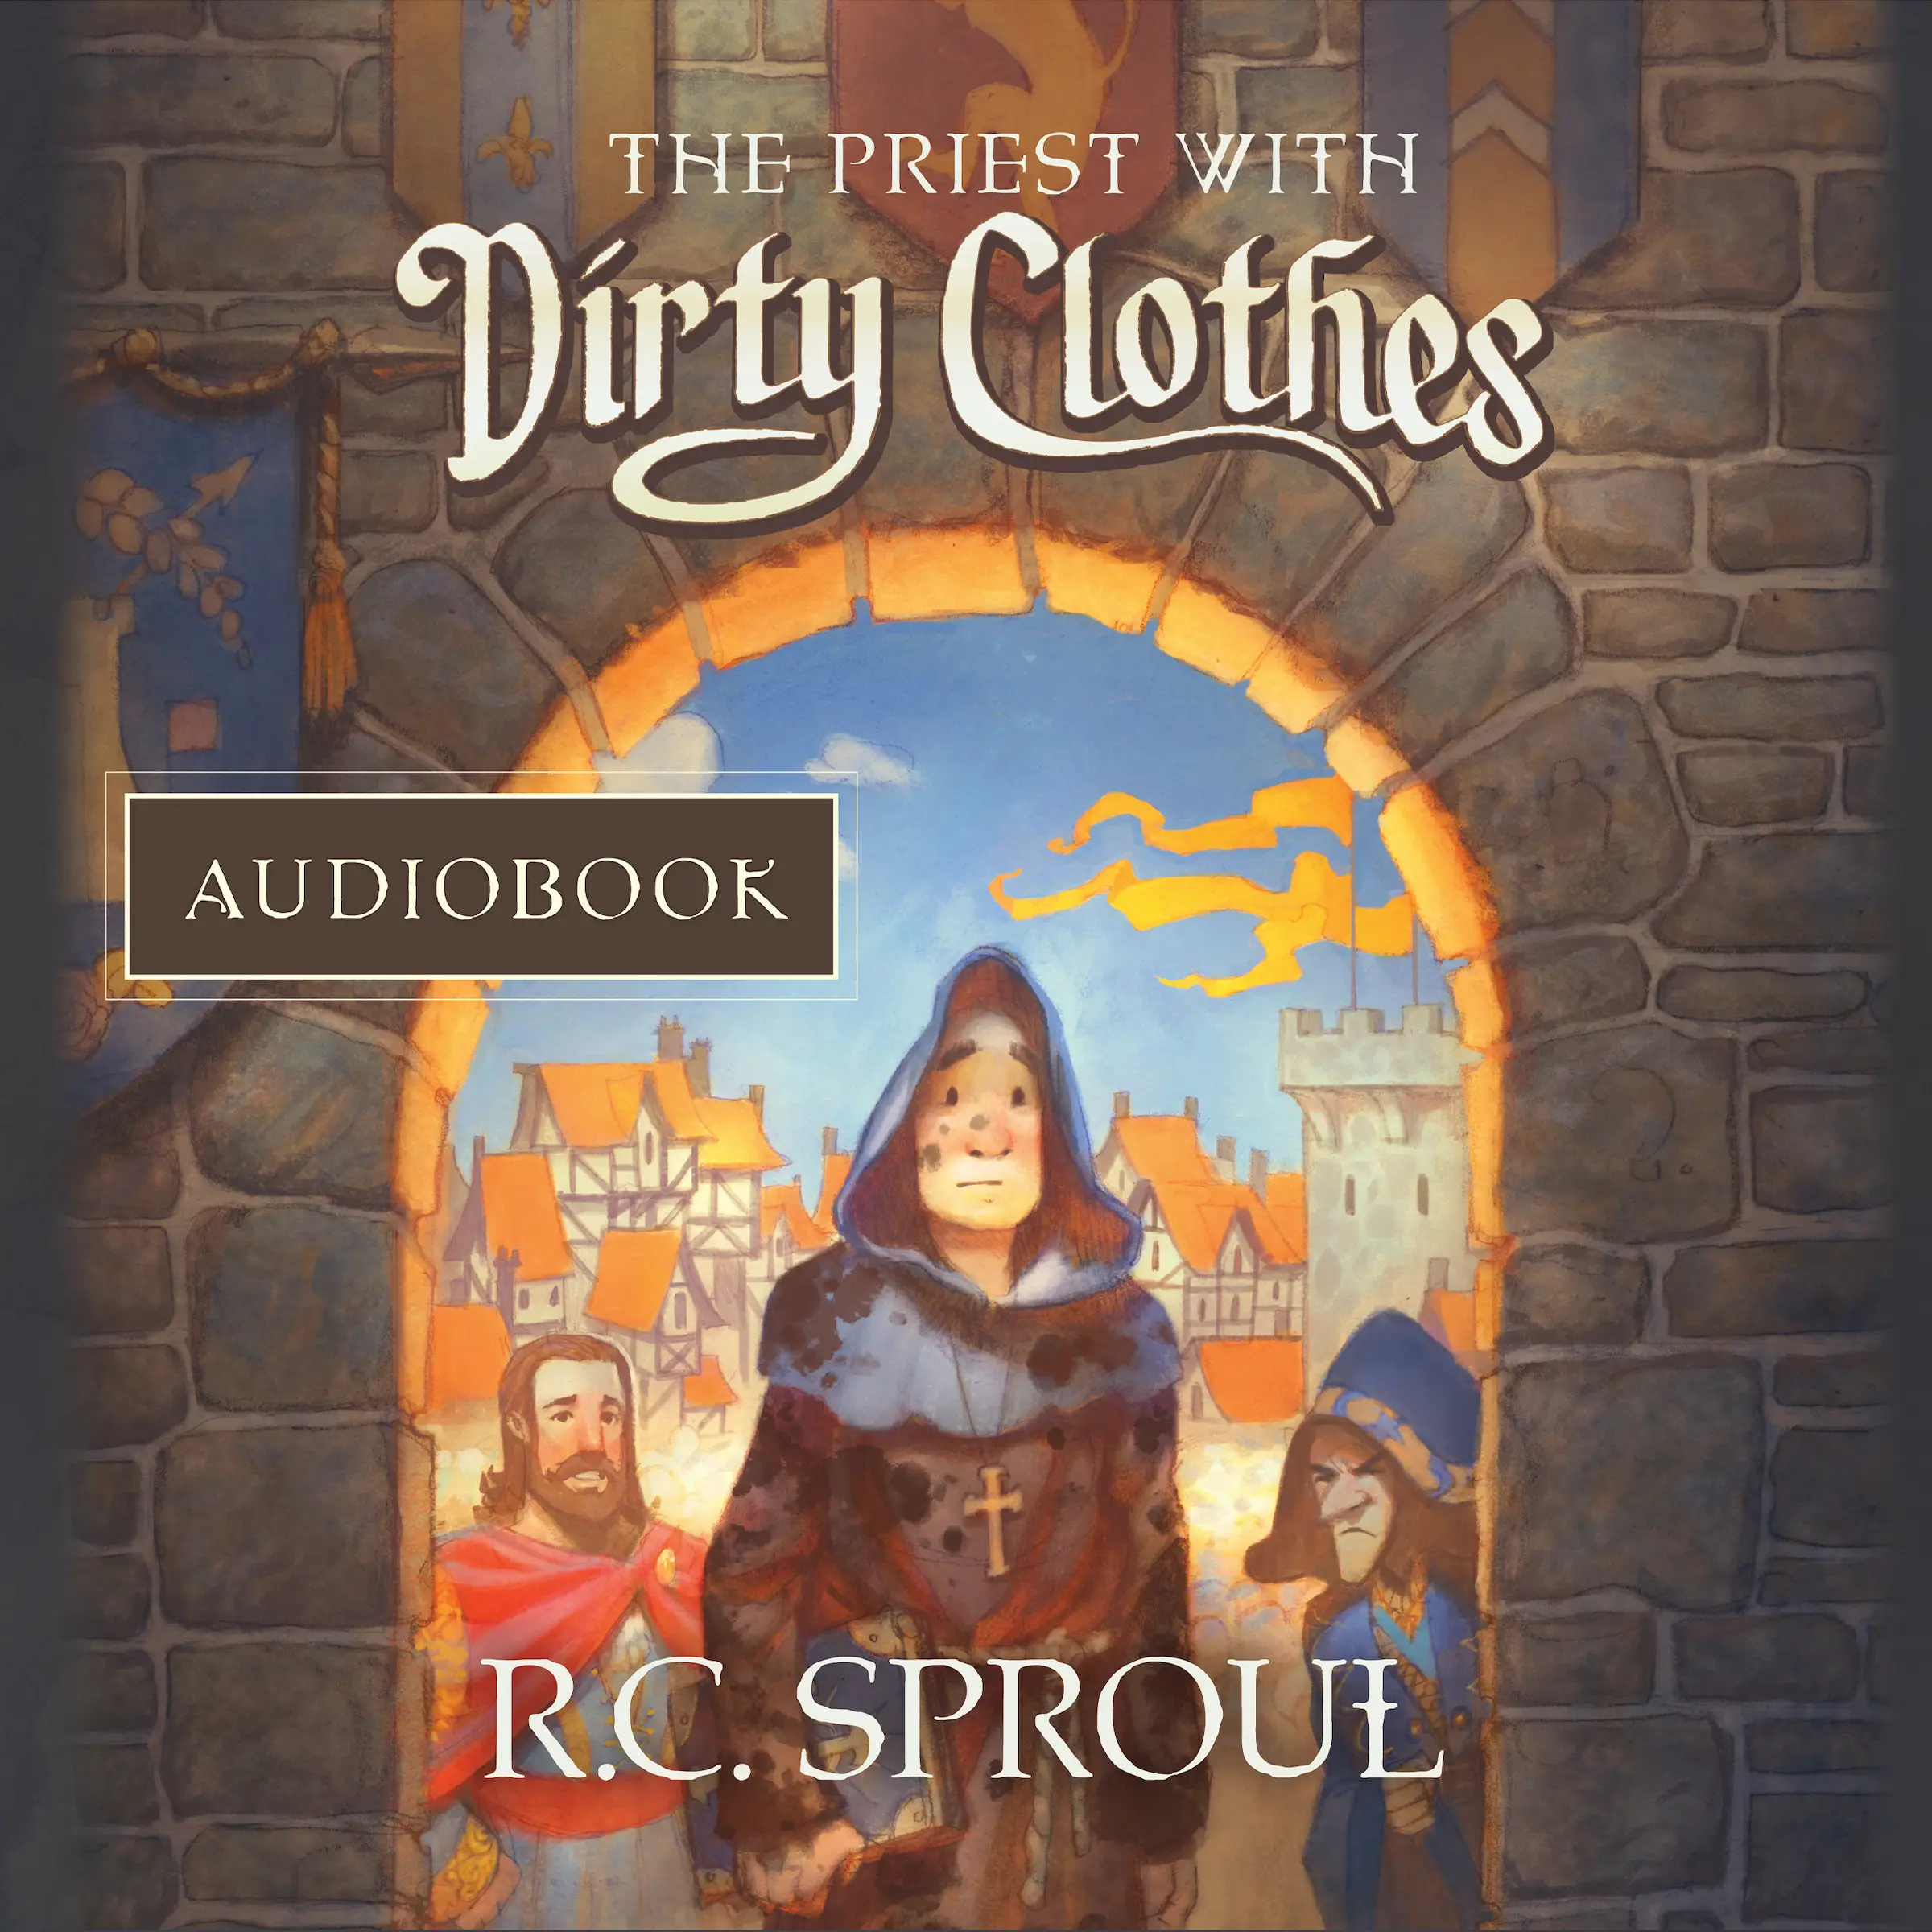 The Priest with Dirty Clothes